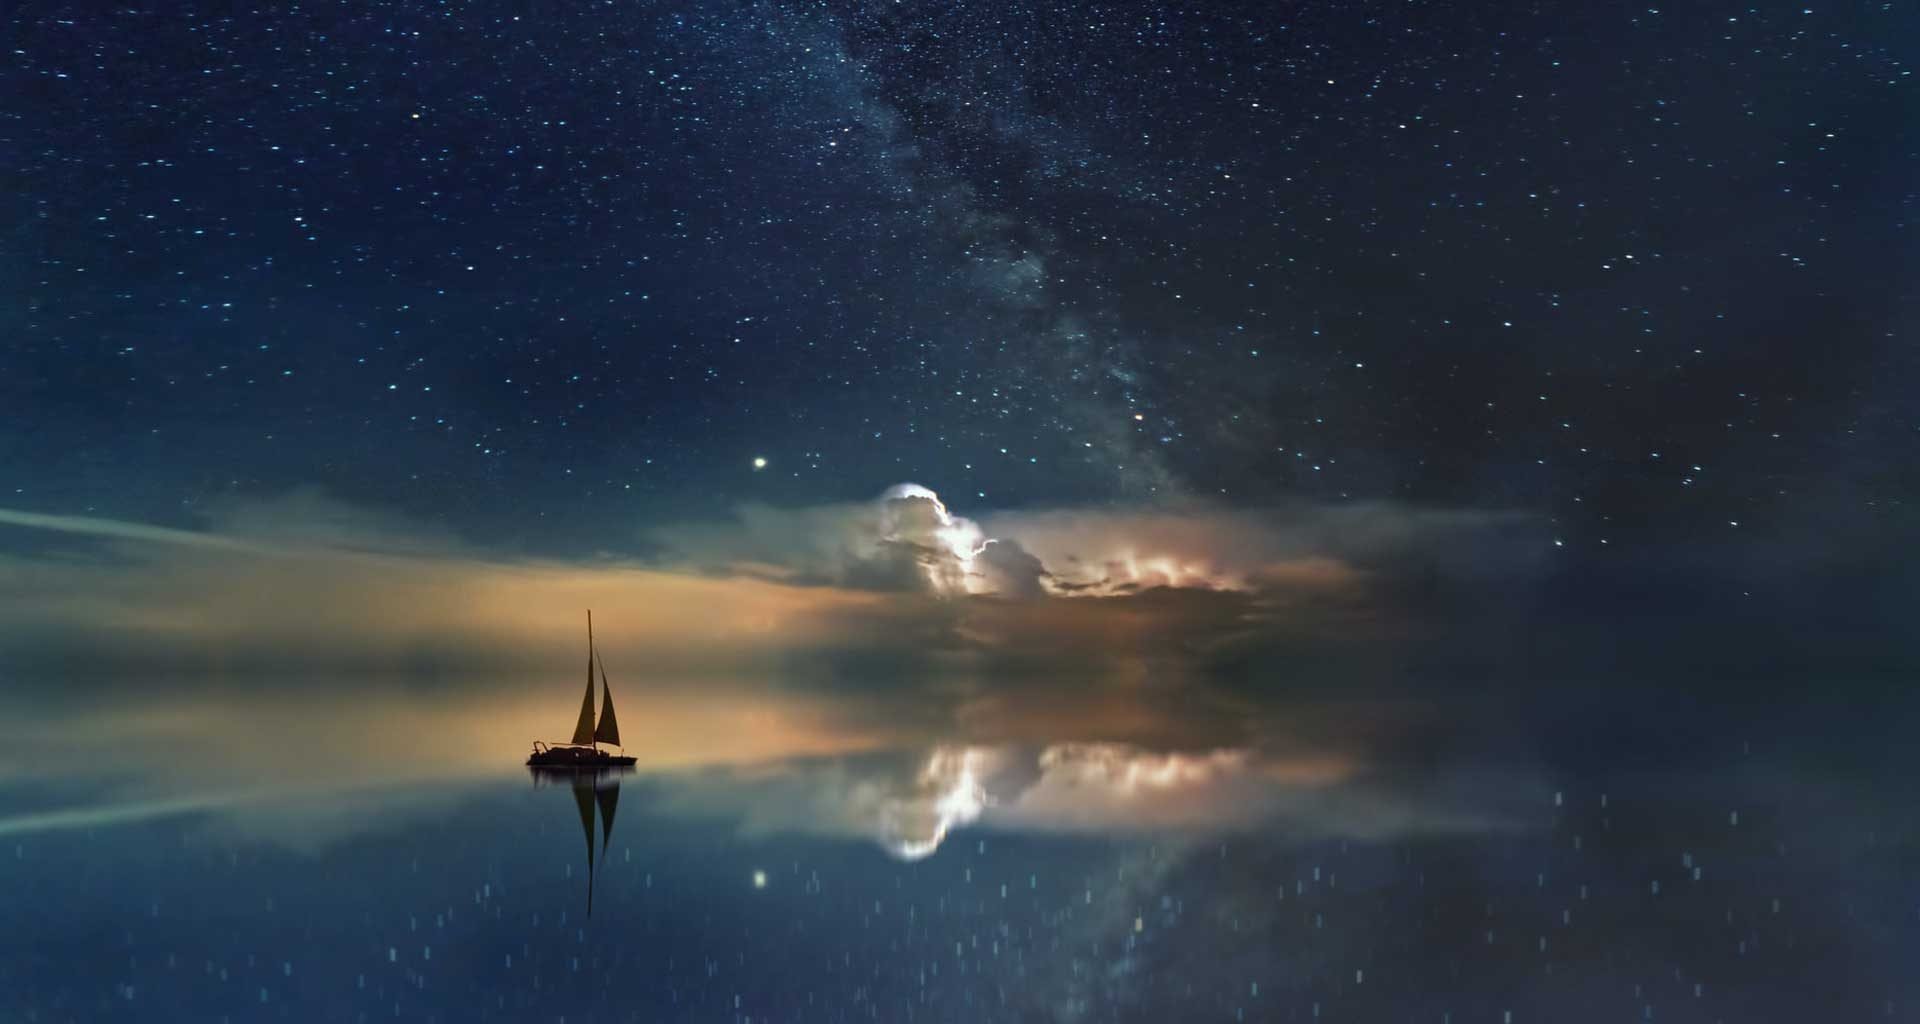 A lone sailboat out in the ocean at night.